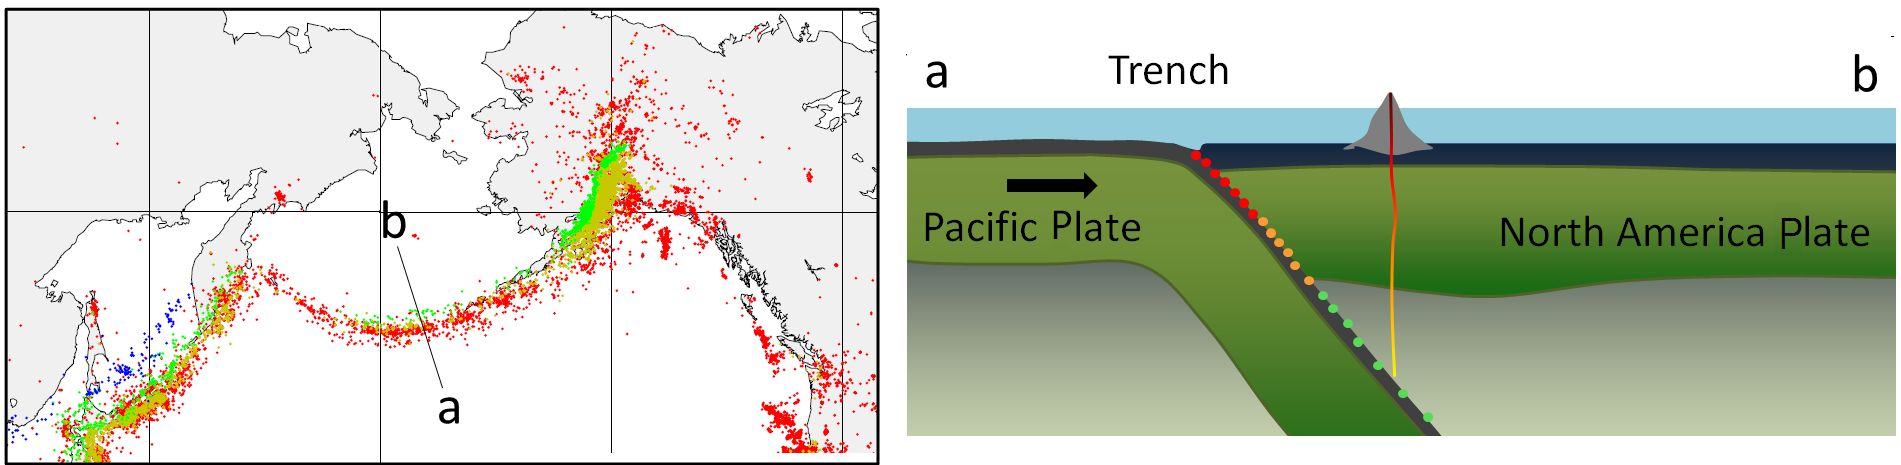 Aleutian Island subduction zone earthquakes. Left- Map view with earthquakes marked as dots. Red dots are the shallowest earthquakes and blue are the deepest. Quakes get deeper further inland from the trench. Right- Cross-section through a-b. Coloured dots show the depth of earthquakes. Colours correspond to dots in the left figure. Earthquake depth is related to the position of the Pacific plate as it travels beneath the North American plate. _Source: Steven Earle (2015) CC BY 4.0 [view source](http://opentextbc.ca/geology/wp-content/uploads/sites/110/2015/07/image0251.png)_